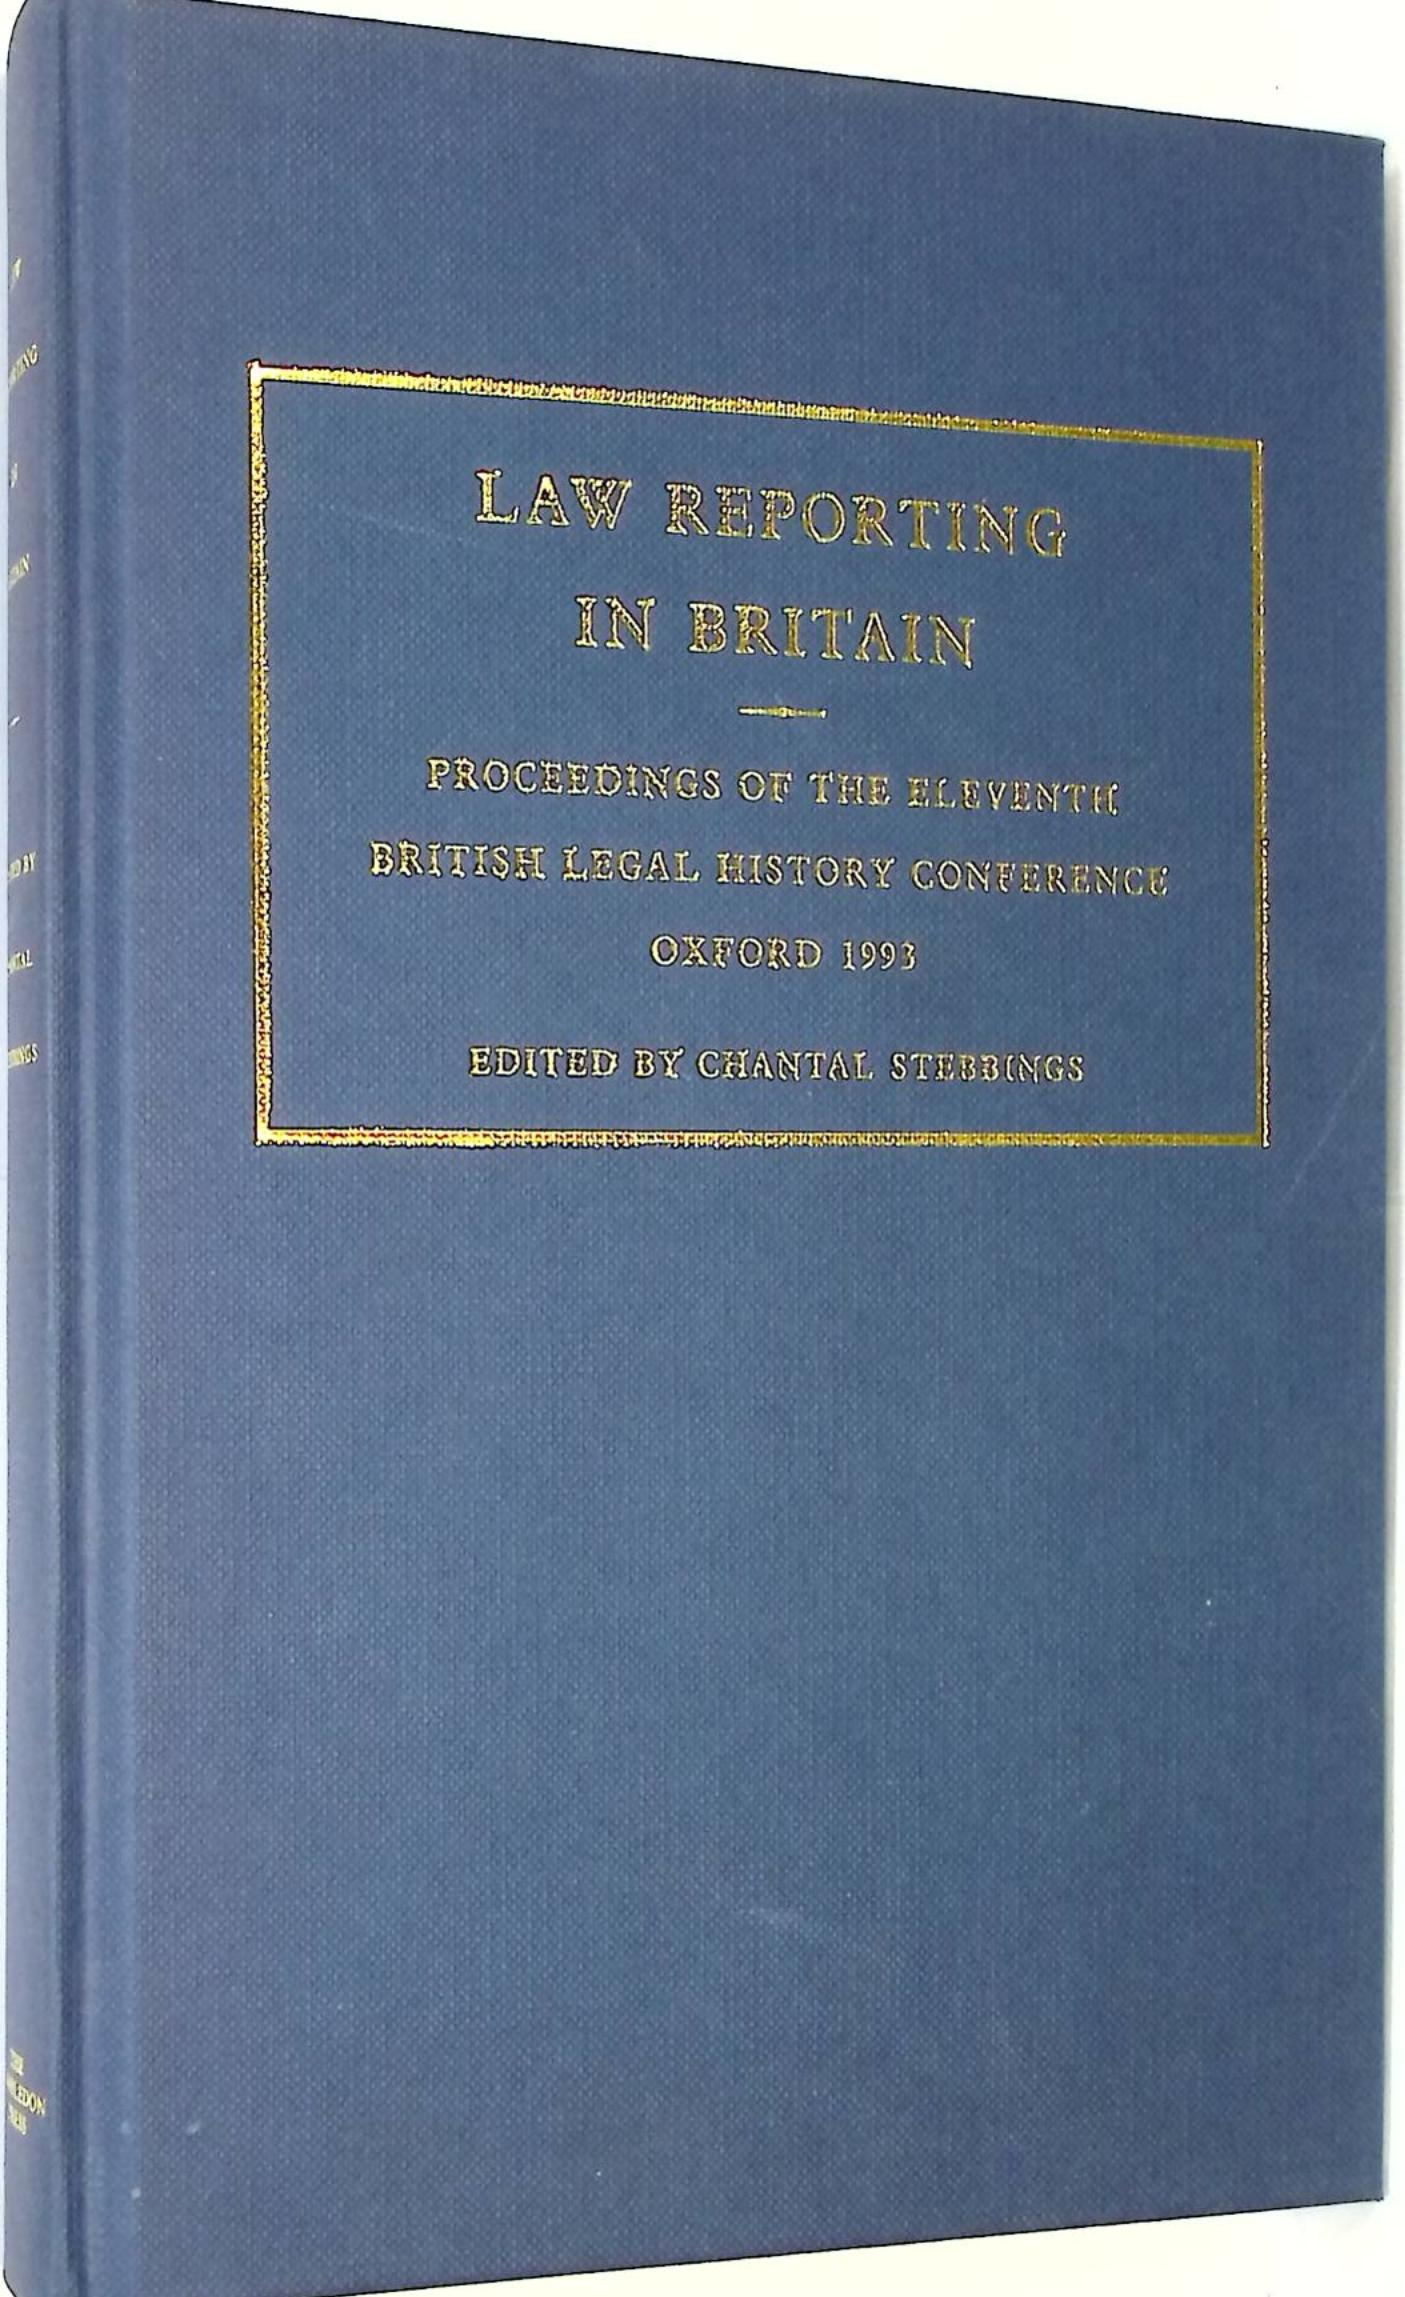 Law Reporting in Britain. Proceedings of the Eleventh British Legal History Conference Oxford 1993